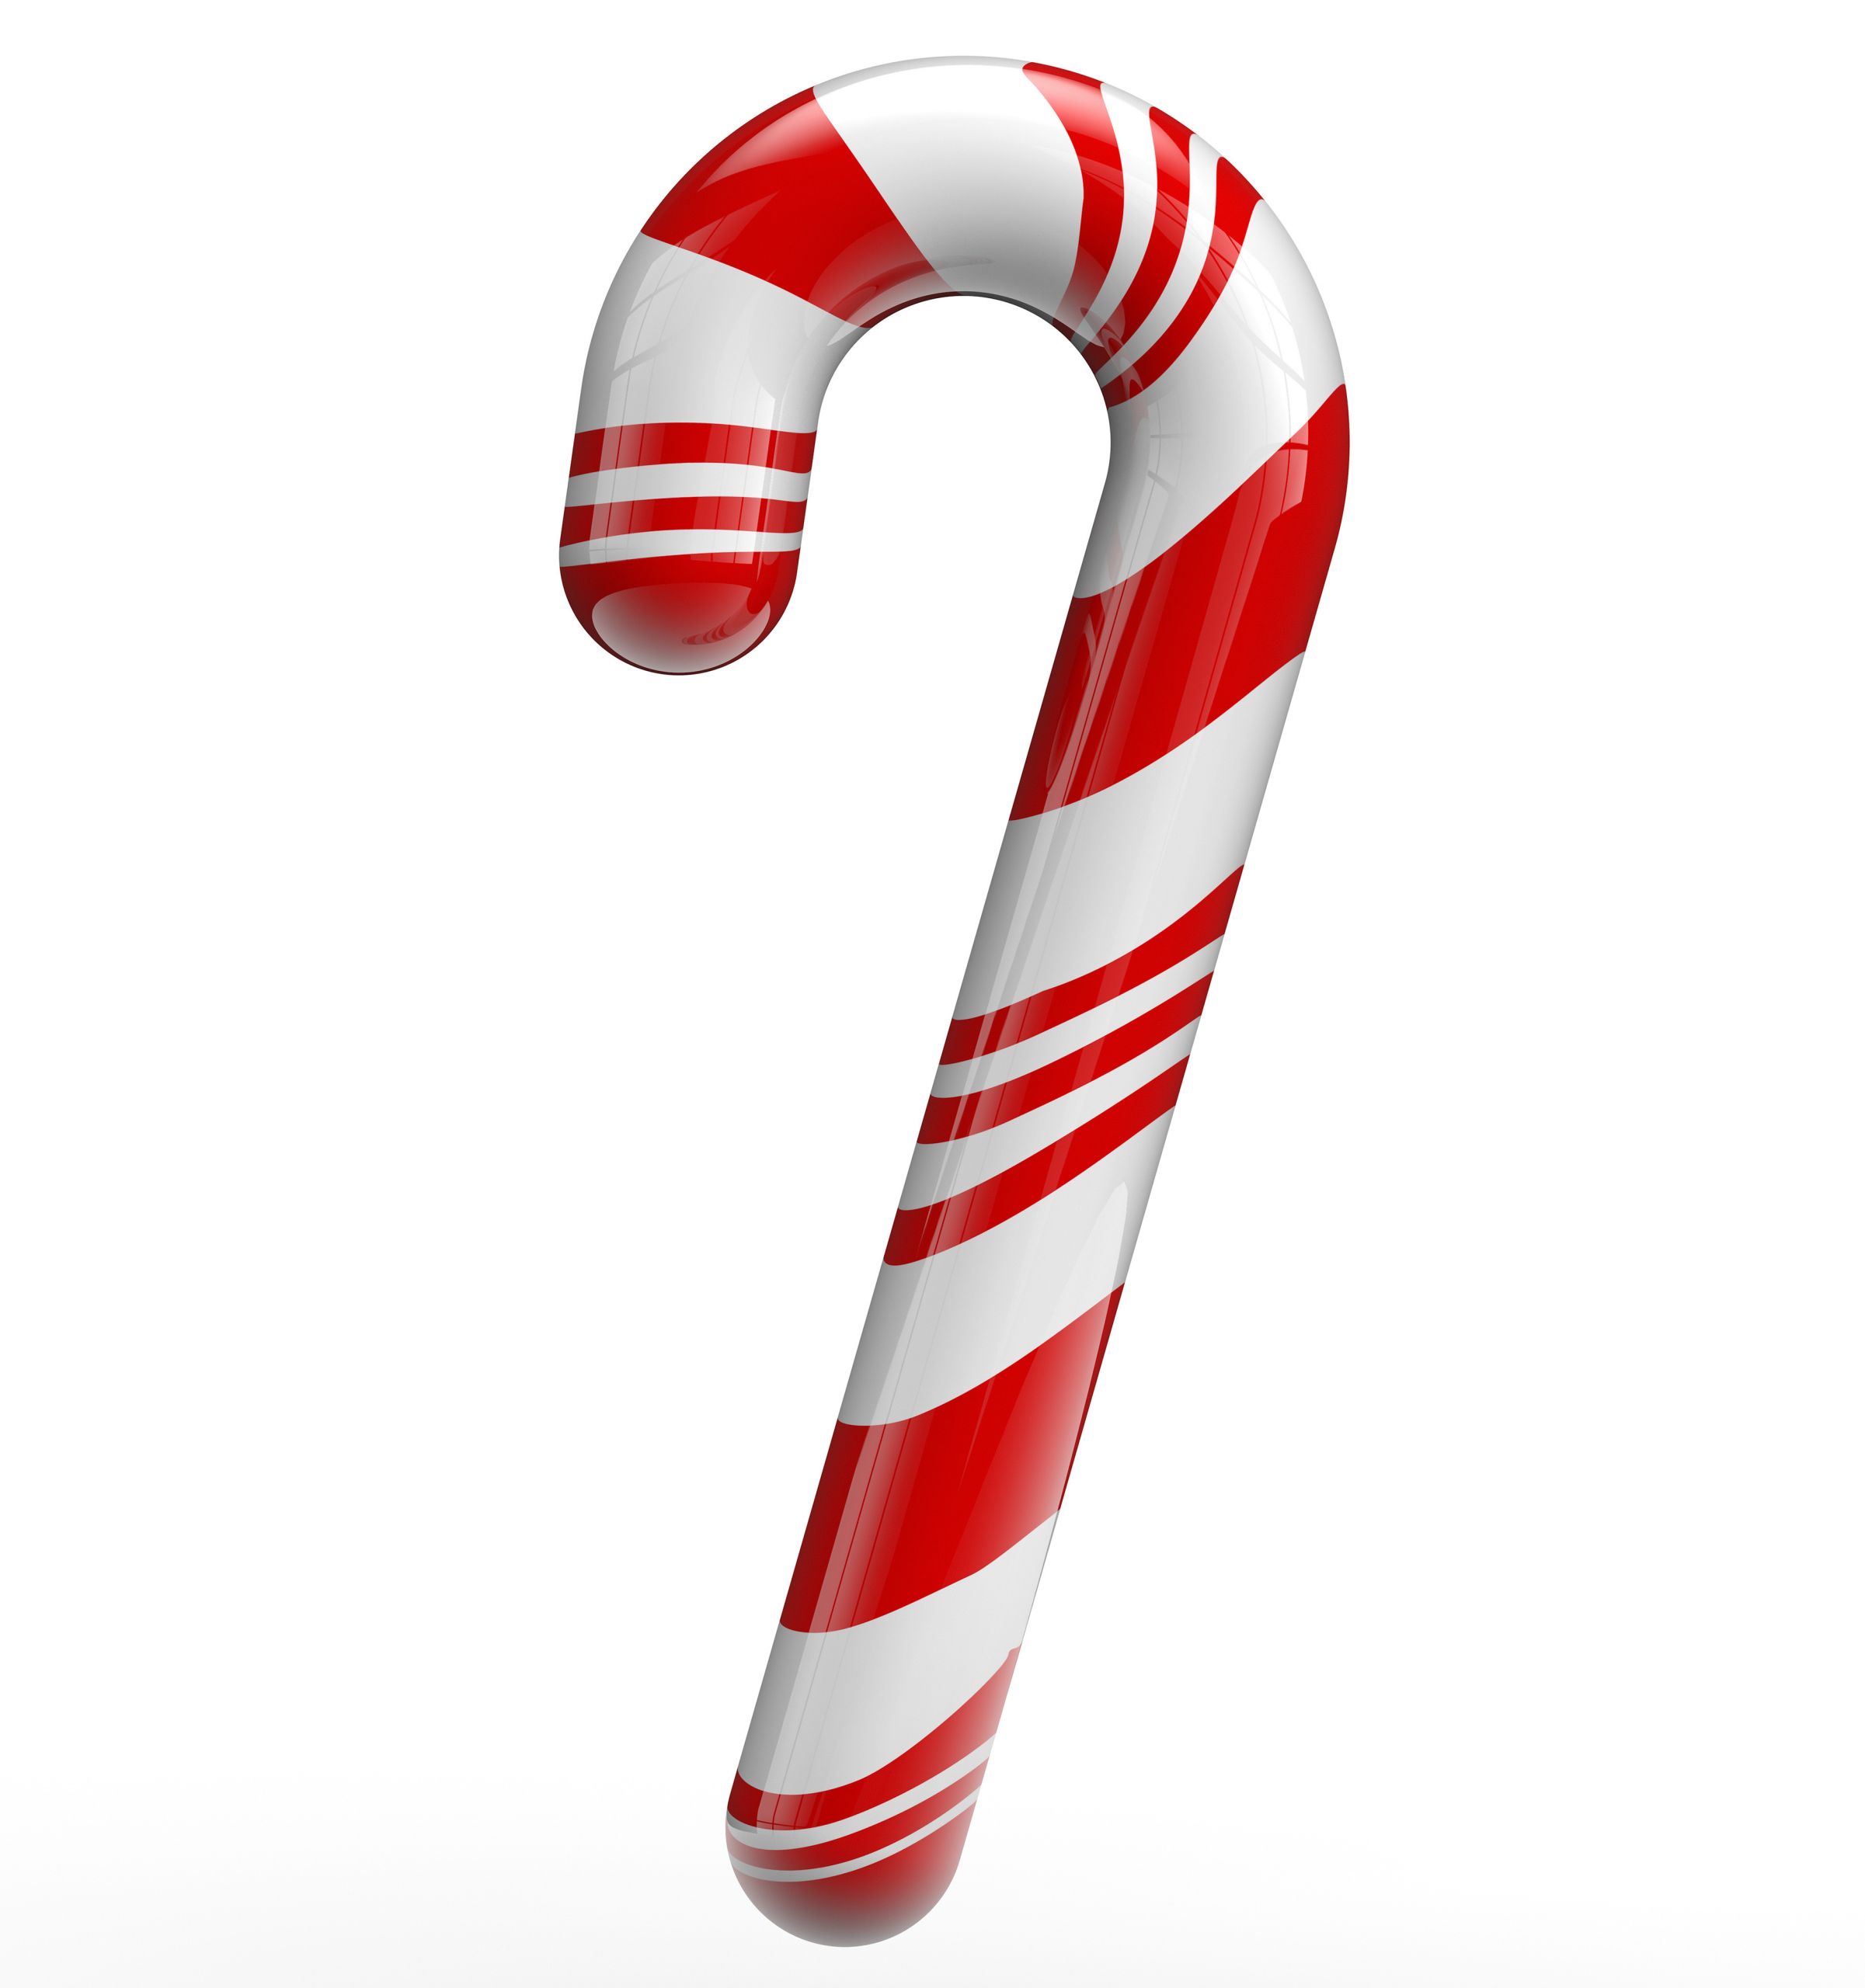 Christmas Candy Canes
 candy canes – 88 Piano Keys